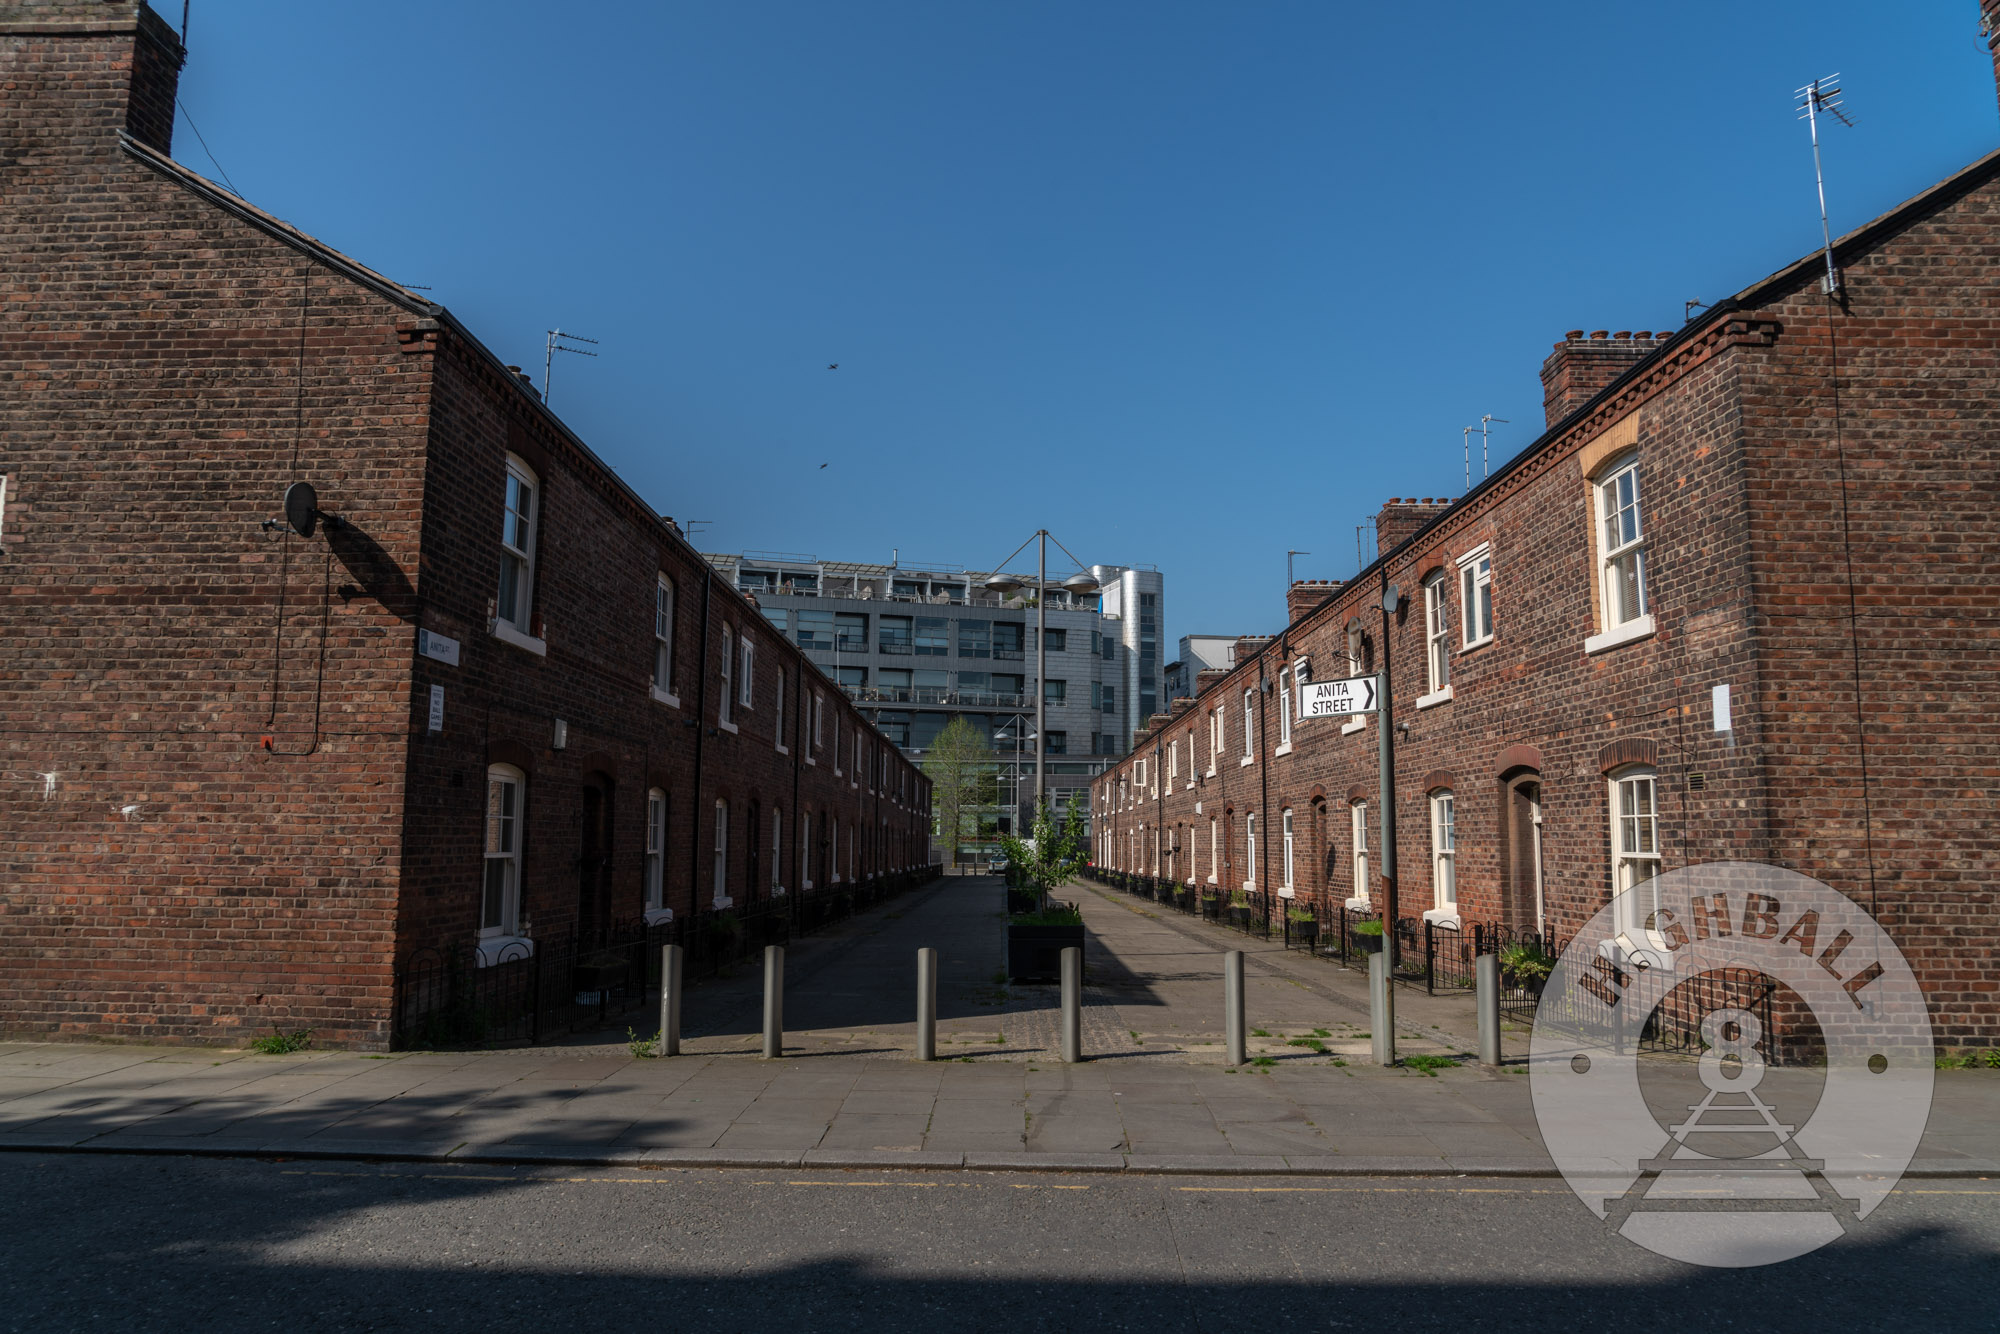 Anita Street, formerly known as Sanitary Street, Ancoats, Manchester, England, UK, 2018.